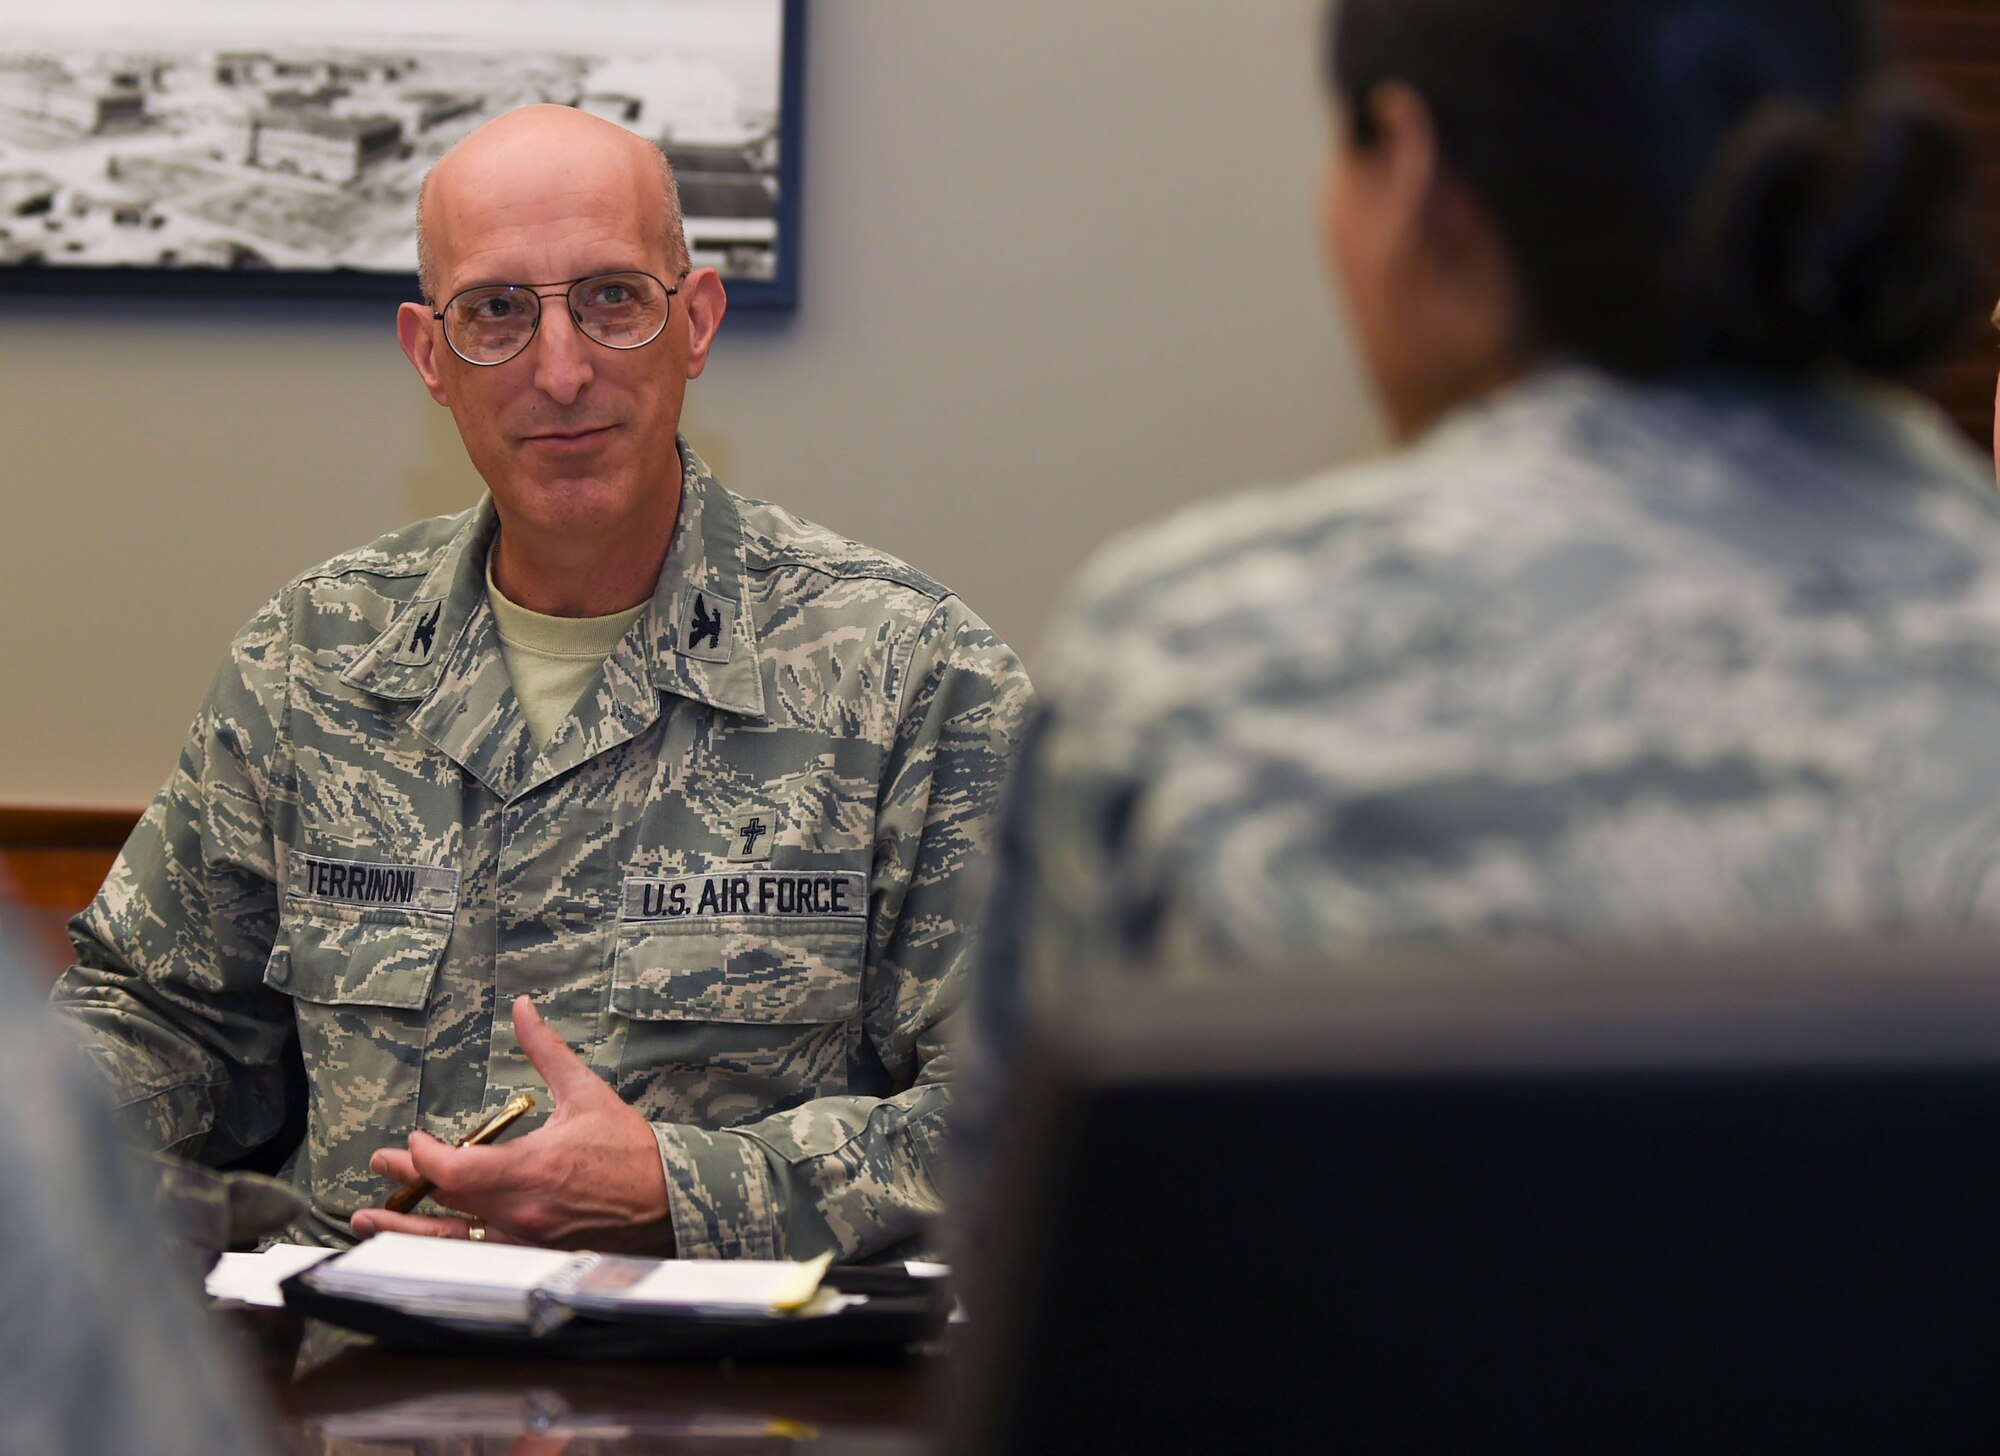 U.S. Air Force Col. David Terrinoni, Joint Base Langley-Eustis senior chaplain, speaks with fellow Integrated Delivery System members regarding action plans they will deliver to senior leaders at Joint Base Langley-Eustis, Va., March 9, 2017. The actions plans are discussed during the quarterly Community Action Information Board, where commanders meet to put the proposed improvements into action. (U.S. Air Force photo/Staff Sgt. Natasha Stannard)